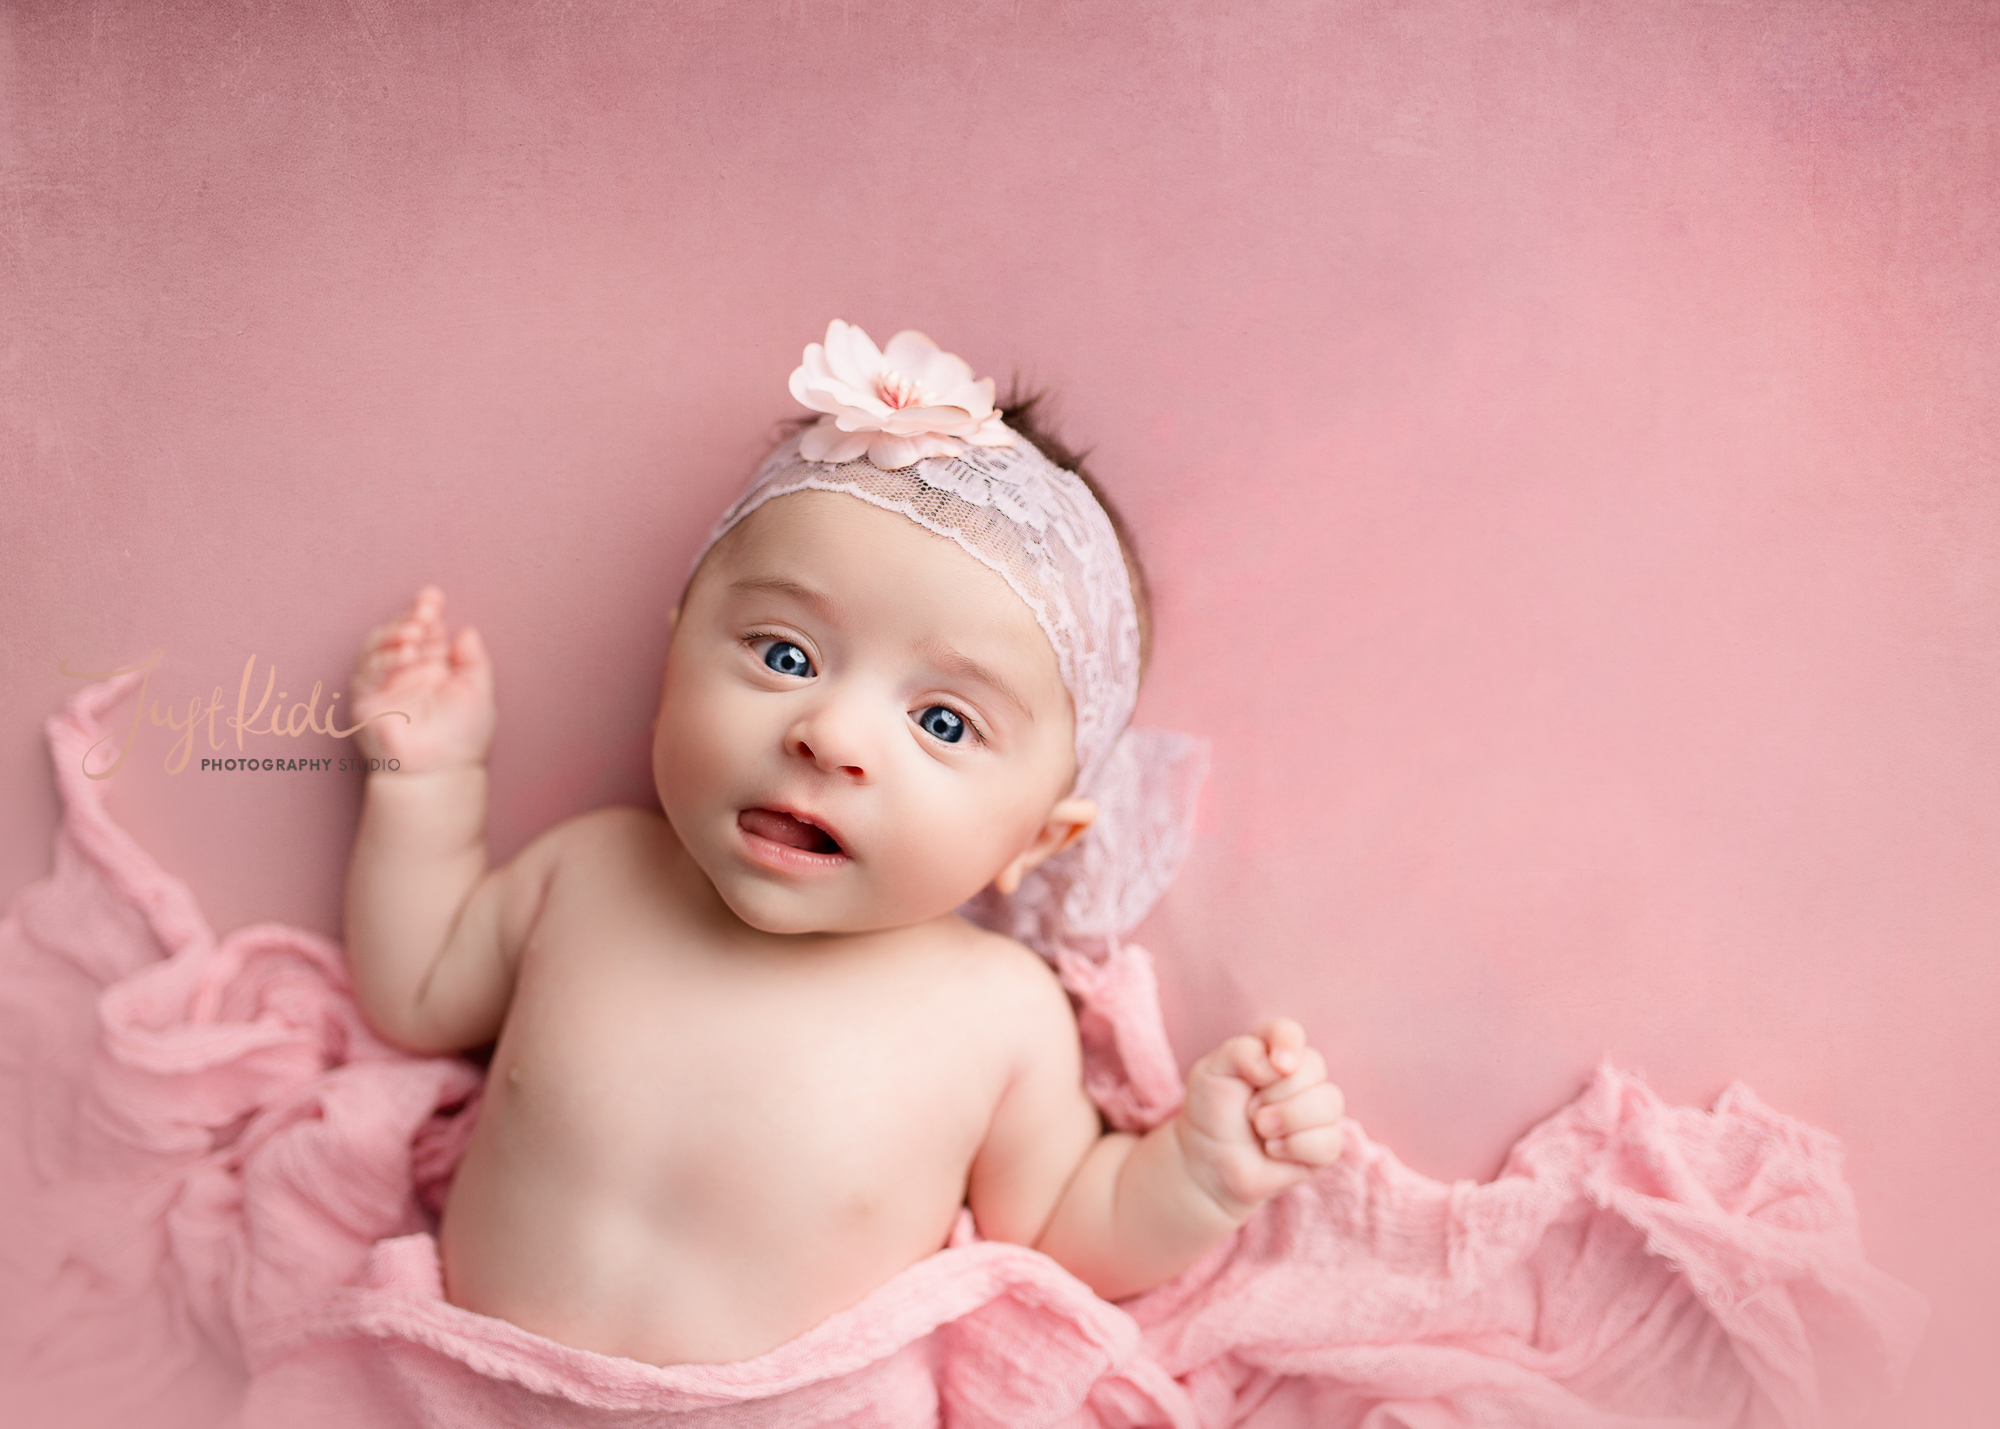 3 Month Baby Portraits | The 3rd session in our Year-In-The-… | Flickr